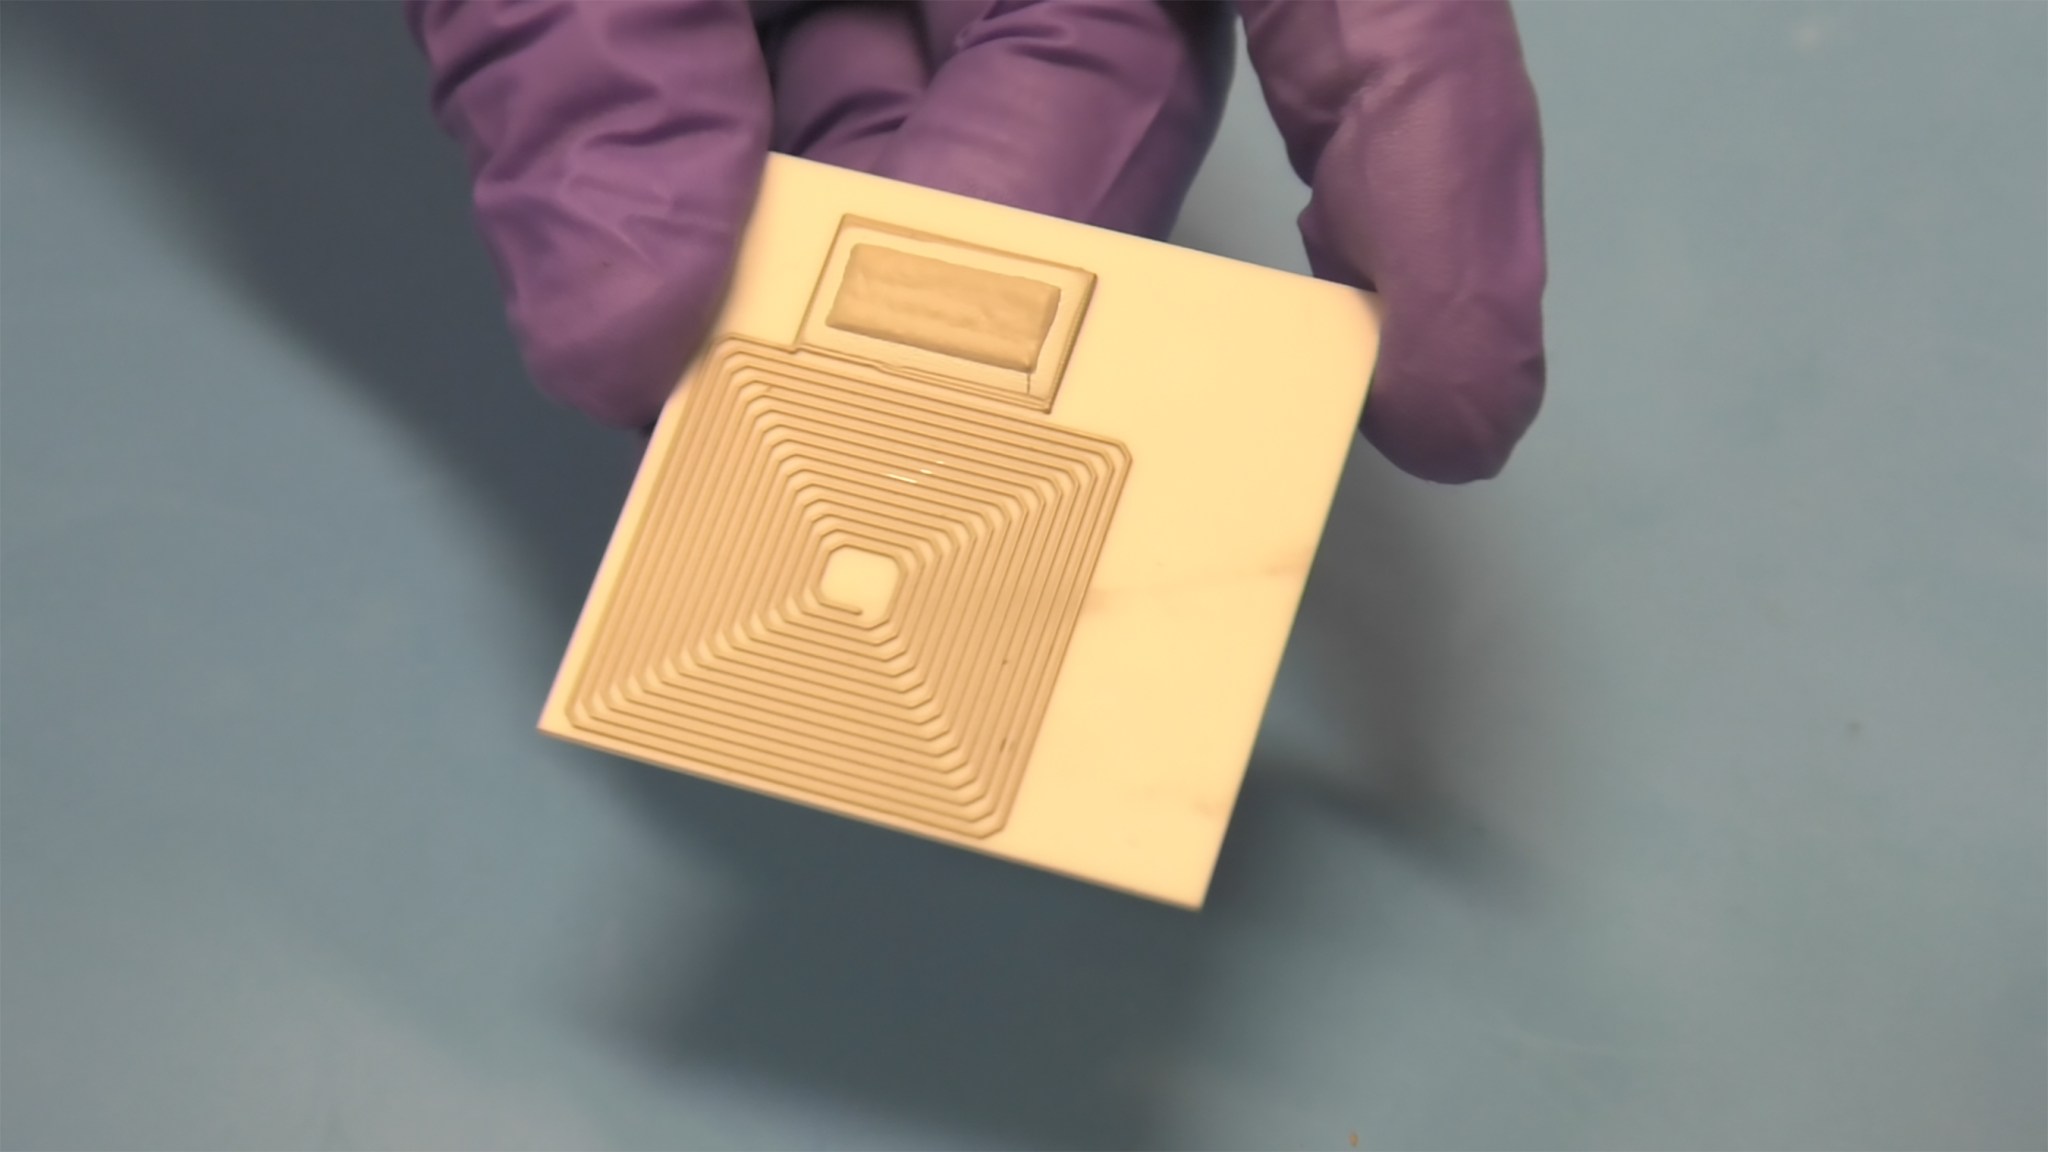 The new NASA ultracapacitor is a solid material designed to store energy and to be safer than batteries.